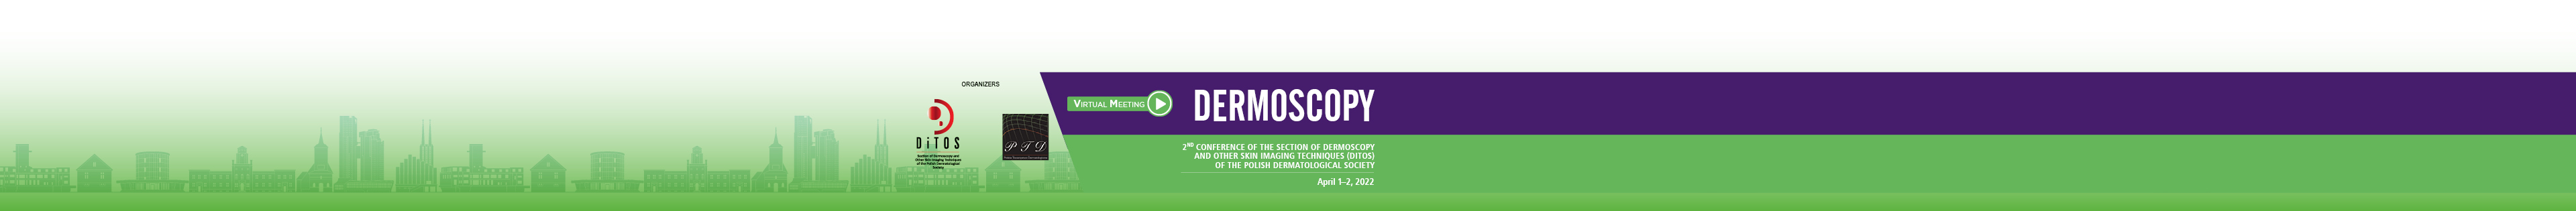 DERMOSCOPY 2ND CONFERENCE OF THE SECTION OF DERMOSCOPY AND OTHER SKIN IMAGING TECHNIQUES (DITOS) OF THE POLISH DERMATOLOGICAL SOCIET